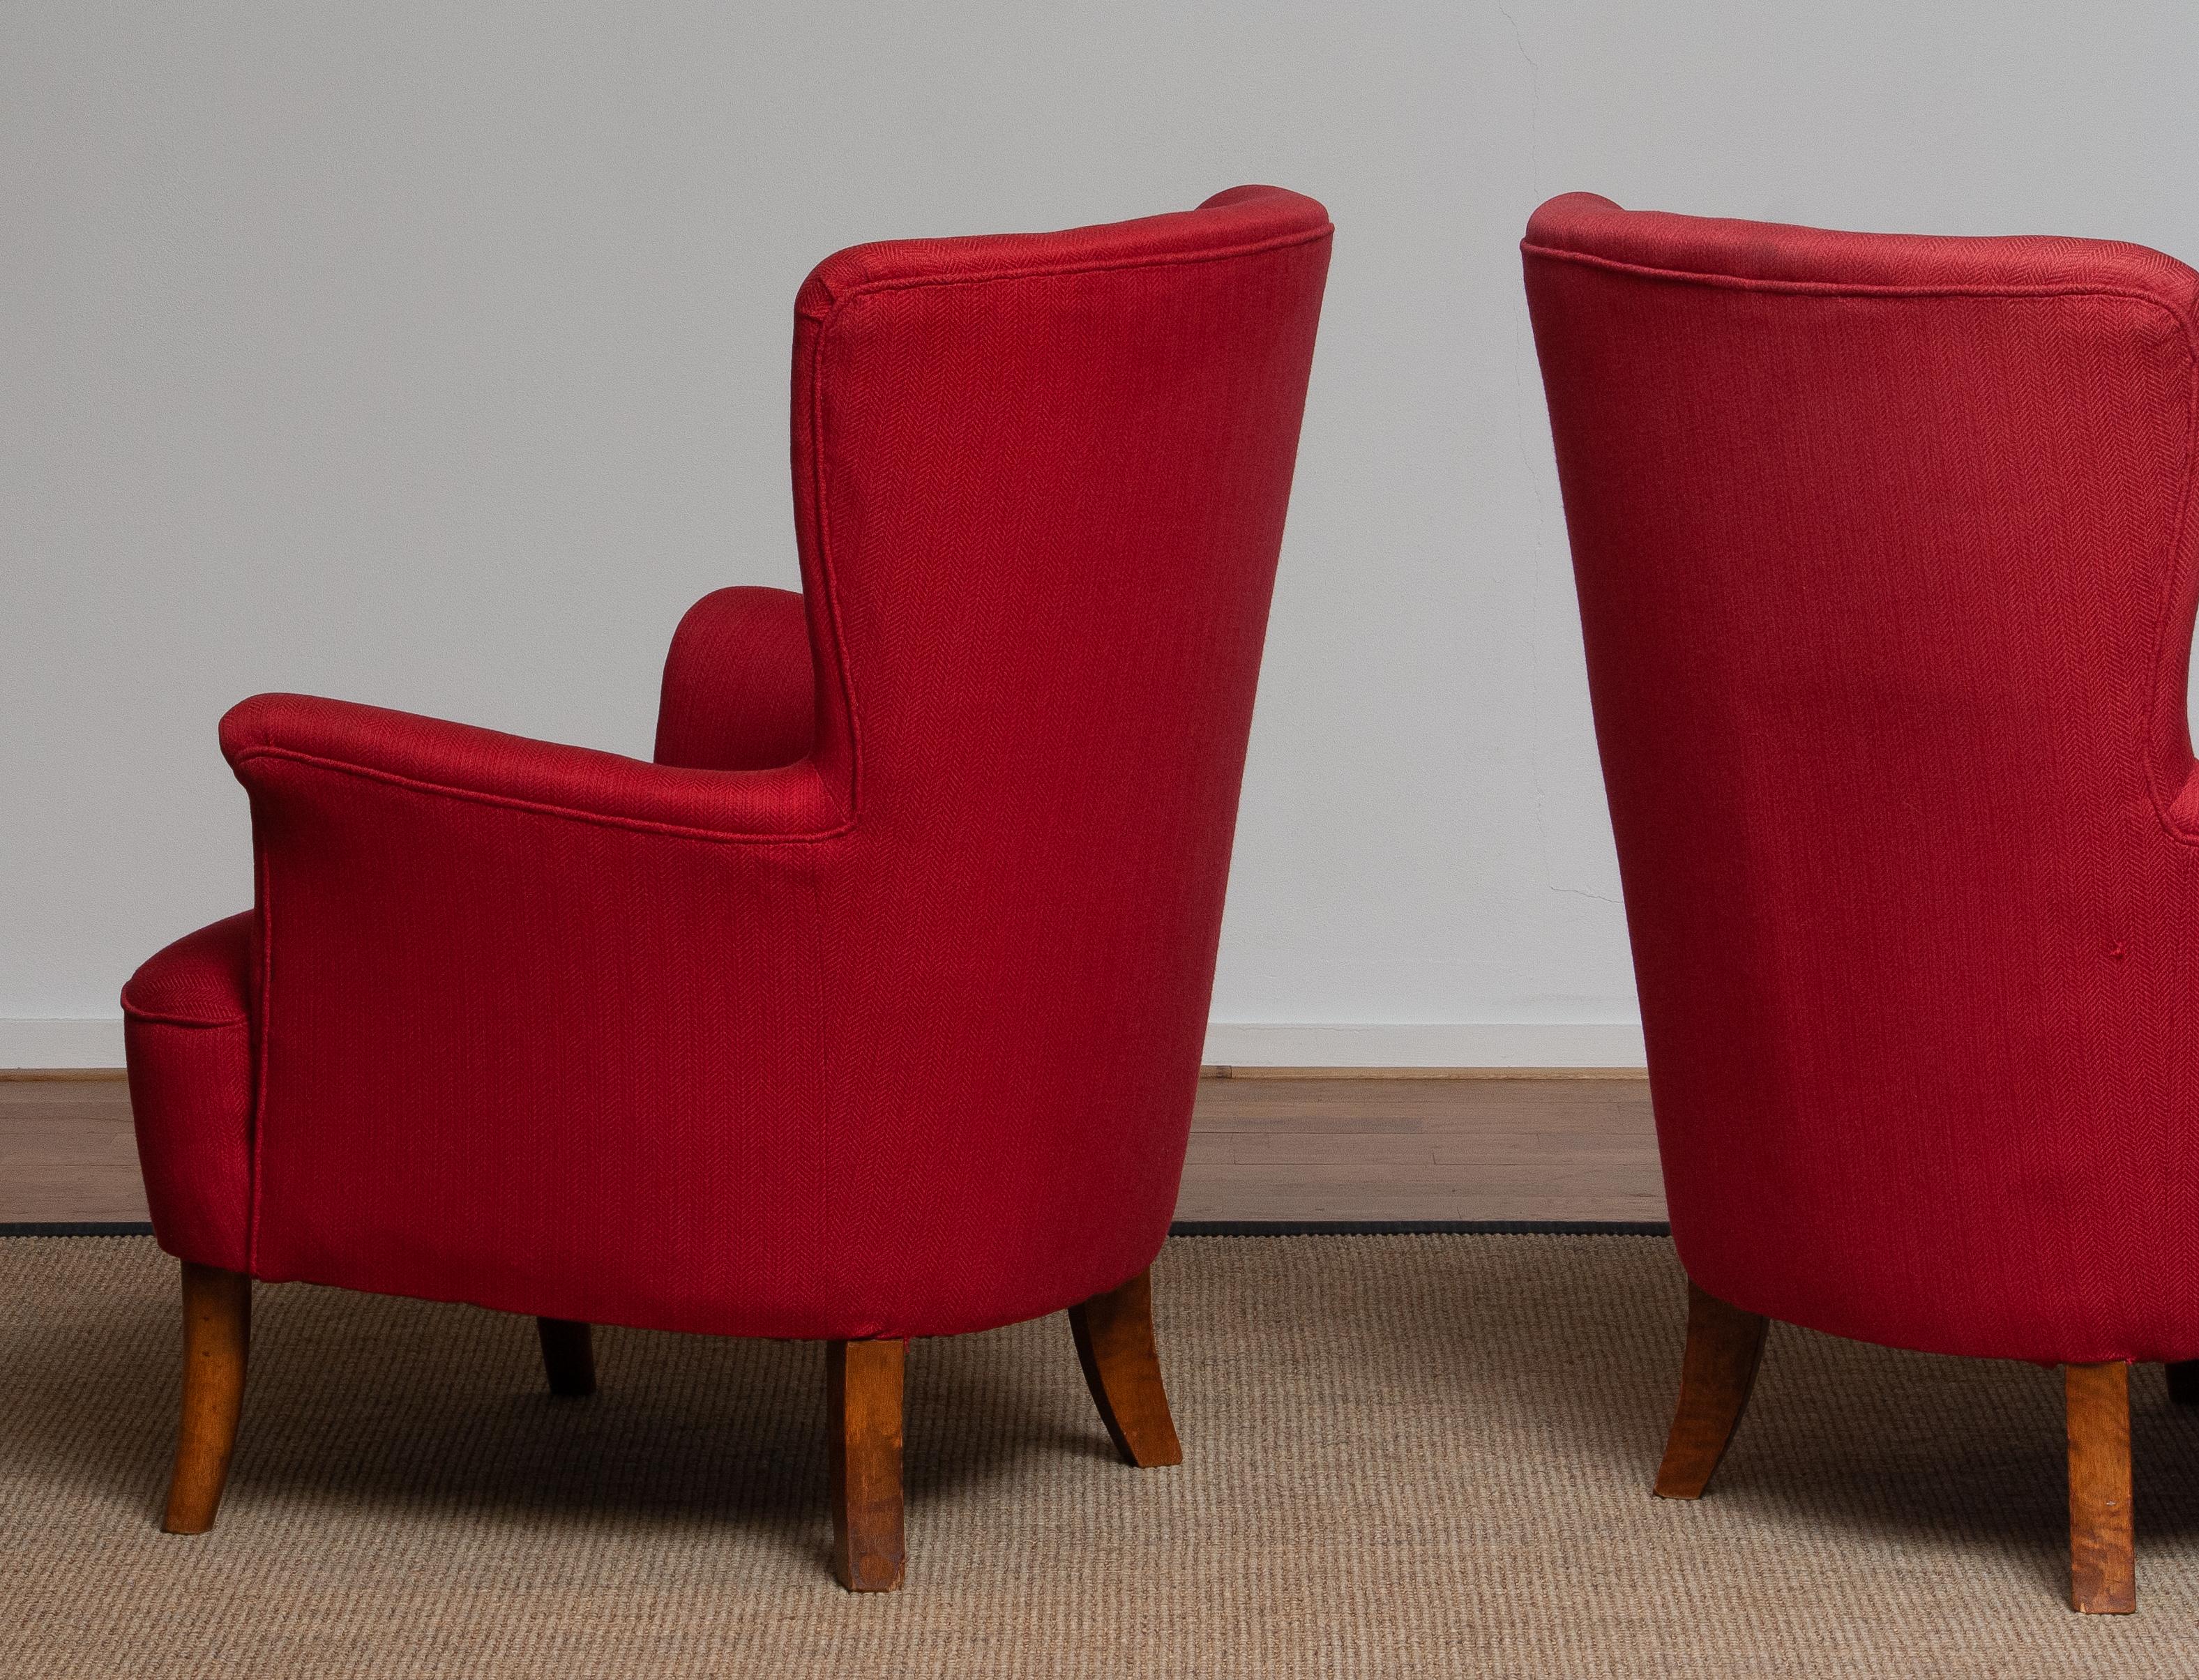 1940s, Pair of Fuchsia Easy or Lounge Chair by Carl Malmsten for Oh Sjögren 5